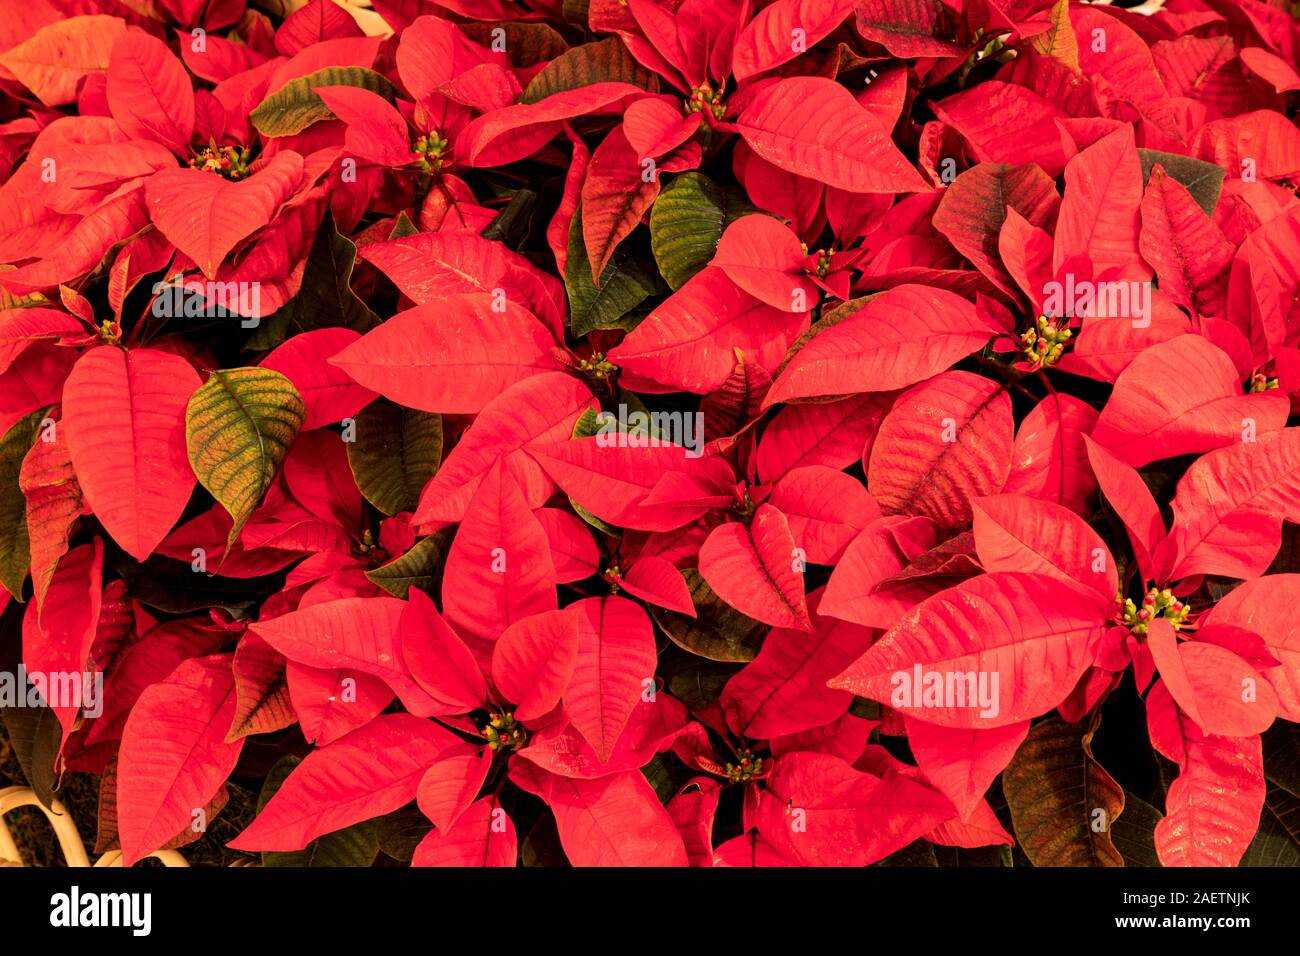 Background of red poinsettia flower plants clustered together at Christmas Stock Photo